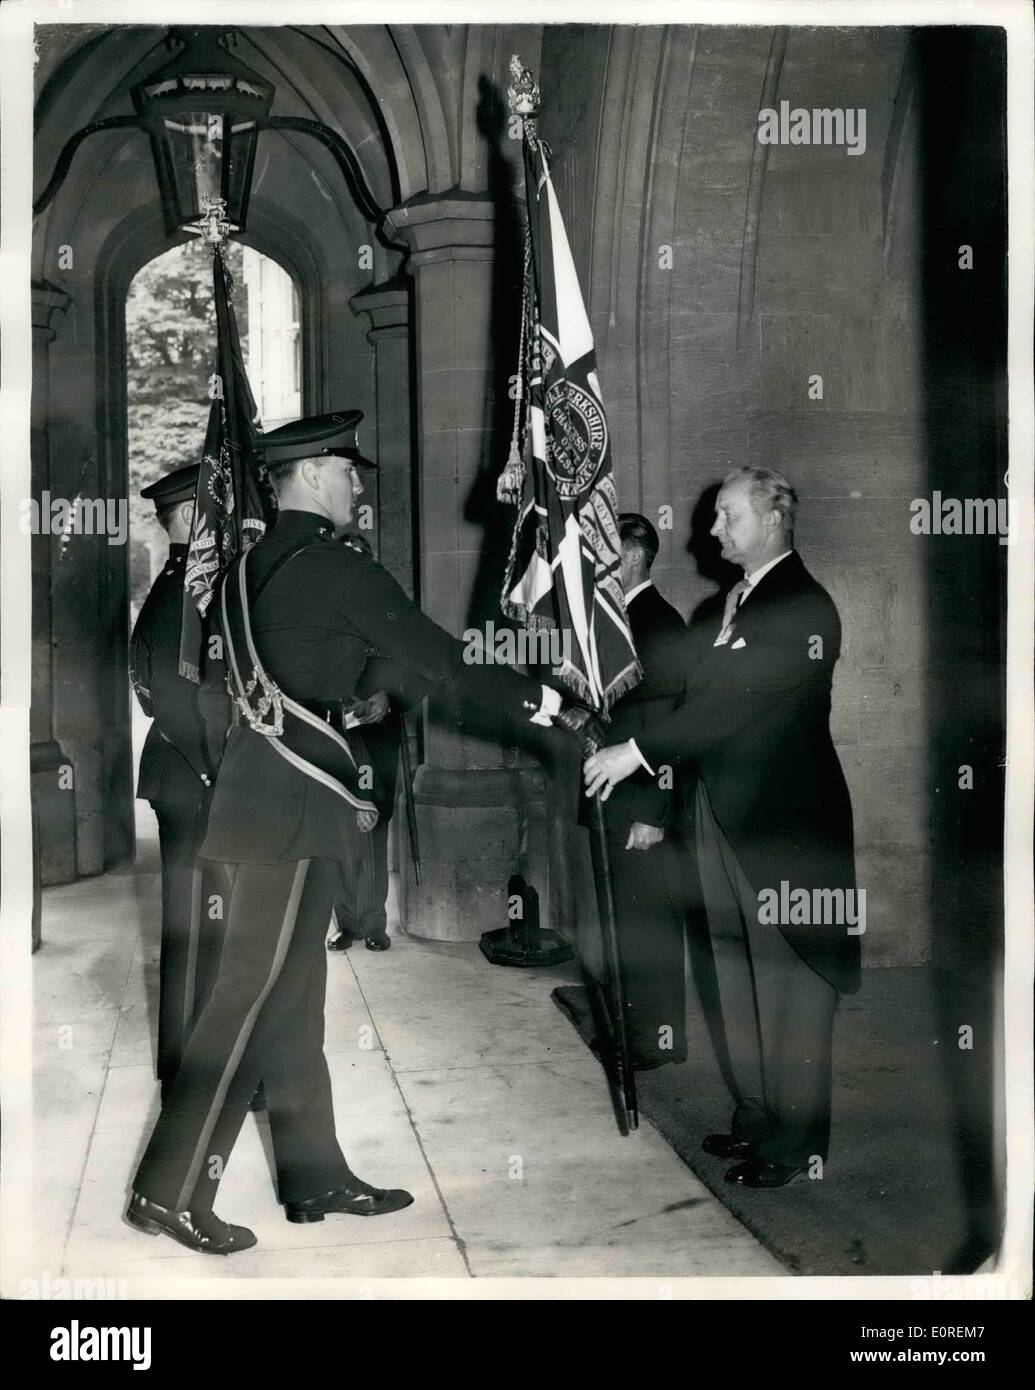 May 22, 1959 - 22-5-59 Laying up of Colours of the Royal Berkshire Regiment. The Colours of the 1st. Bn. The Royal Berkshire Regiment, were laid up today in the State Apartments at Windsor Castle. The Royal Berkshire Regiment and the Wiltshire Regiment are to amalgamate at Albany Barracks, Newport, Isle of Wight, on June 9th, to form the Duke of Edinburgh's Royal Regiment (Berkshire and Wiltshire). Keystone Photo Shows: The Colours of the 1st. Bn. Royal Berkshire Regiment, being handed over to Superintendent of the Castle, Mr. S. Lucking today. Stock Photo